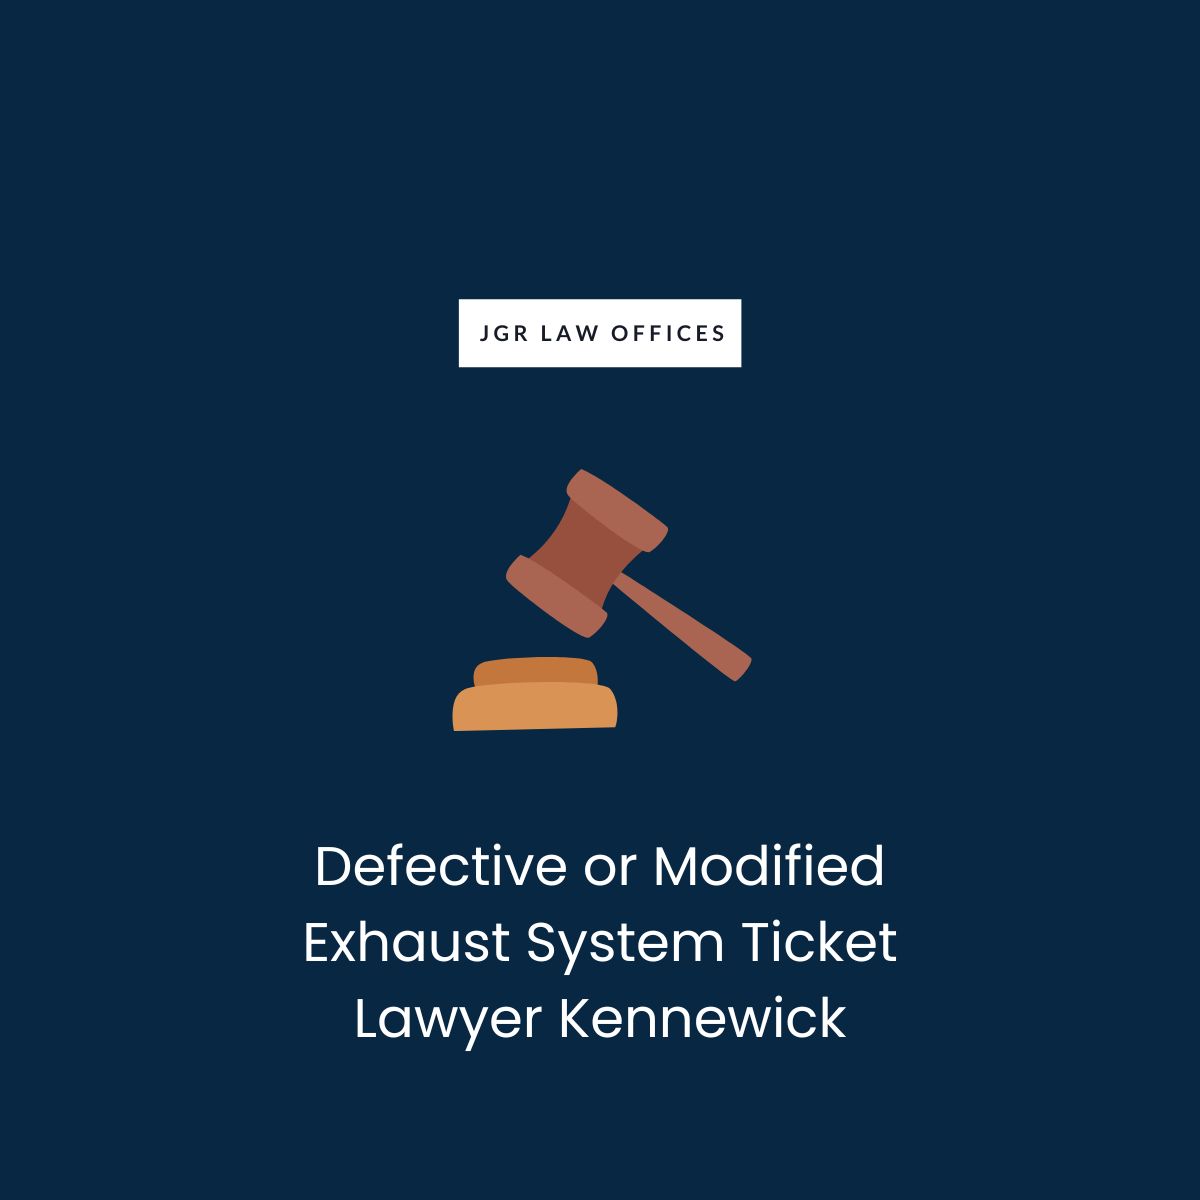 Defective or Modified Exhaust System Ticket Attorney Kennewick